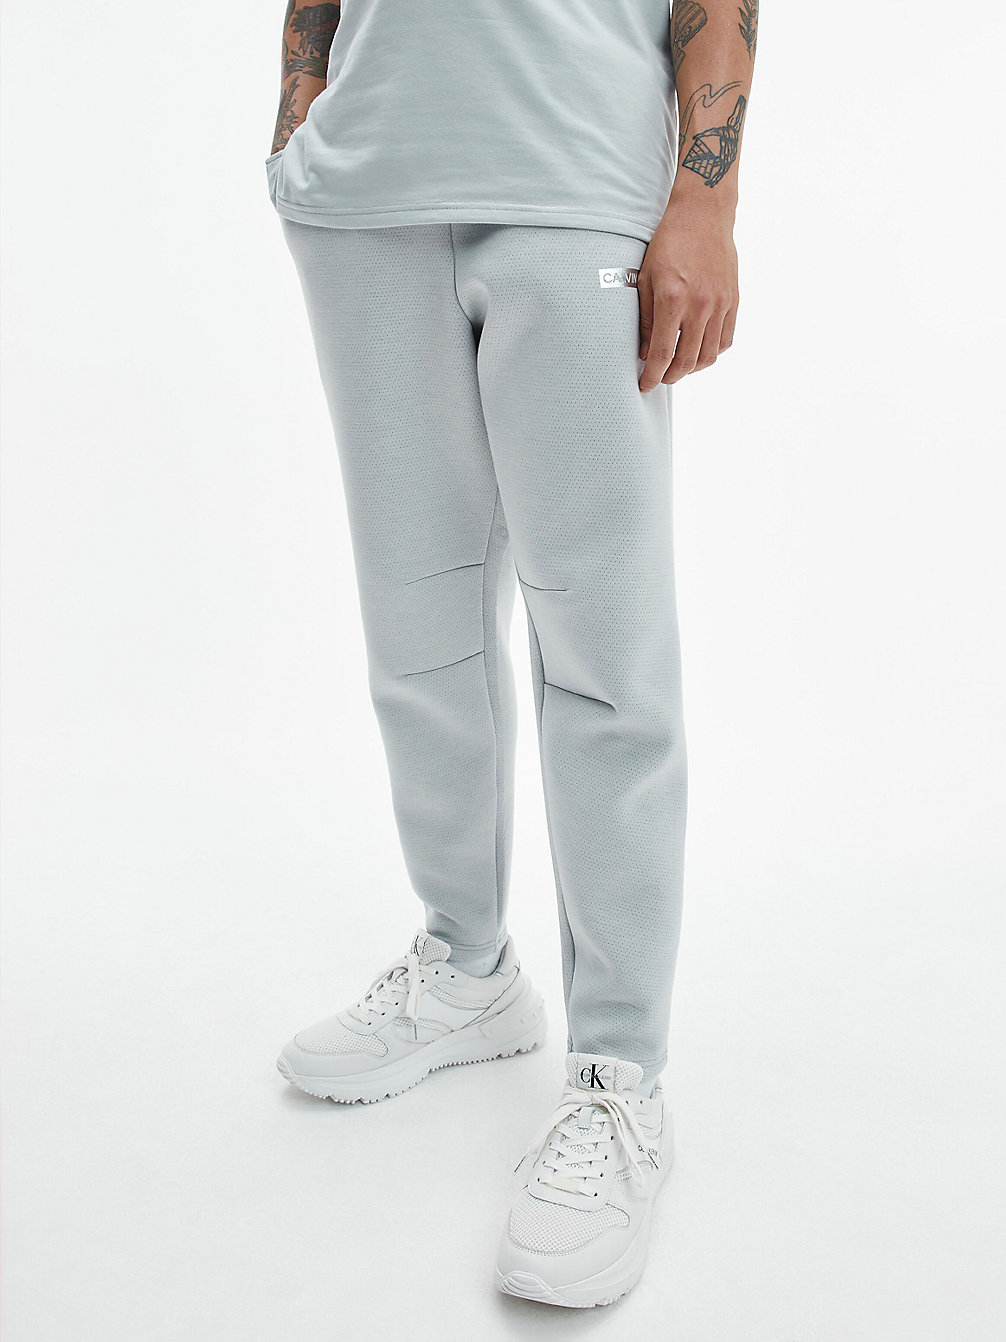 HIGH RISE / CYBER YELLOW > Tapered Jogginghose > undefined Herren - Calvin Klein